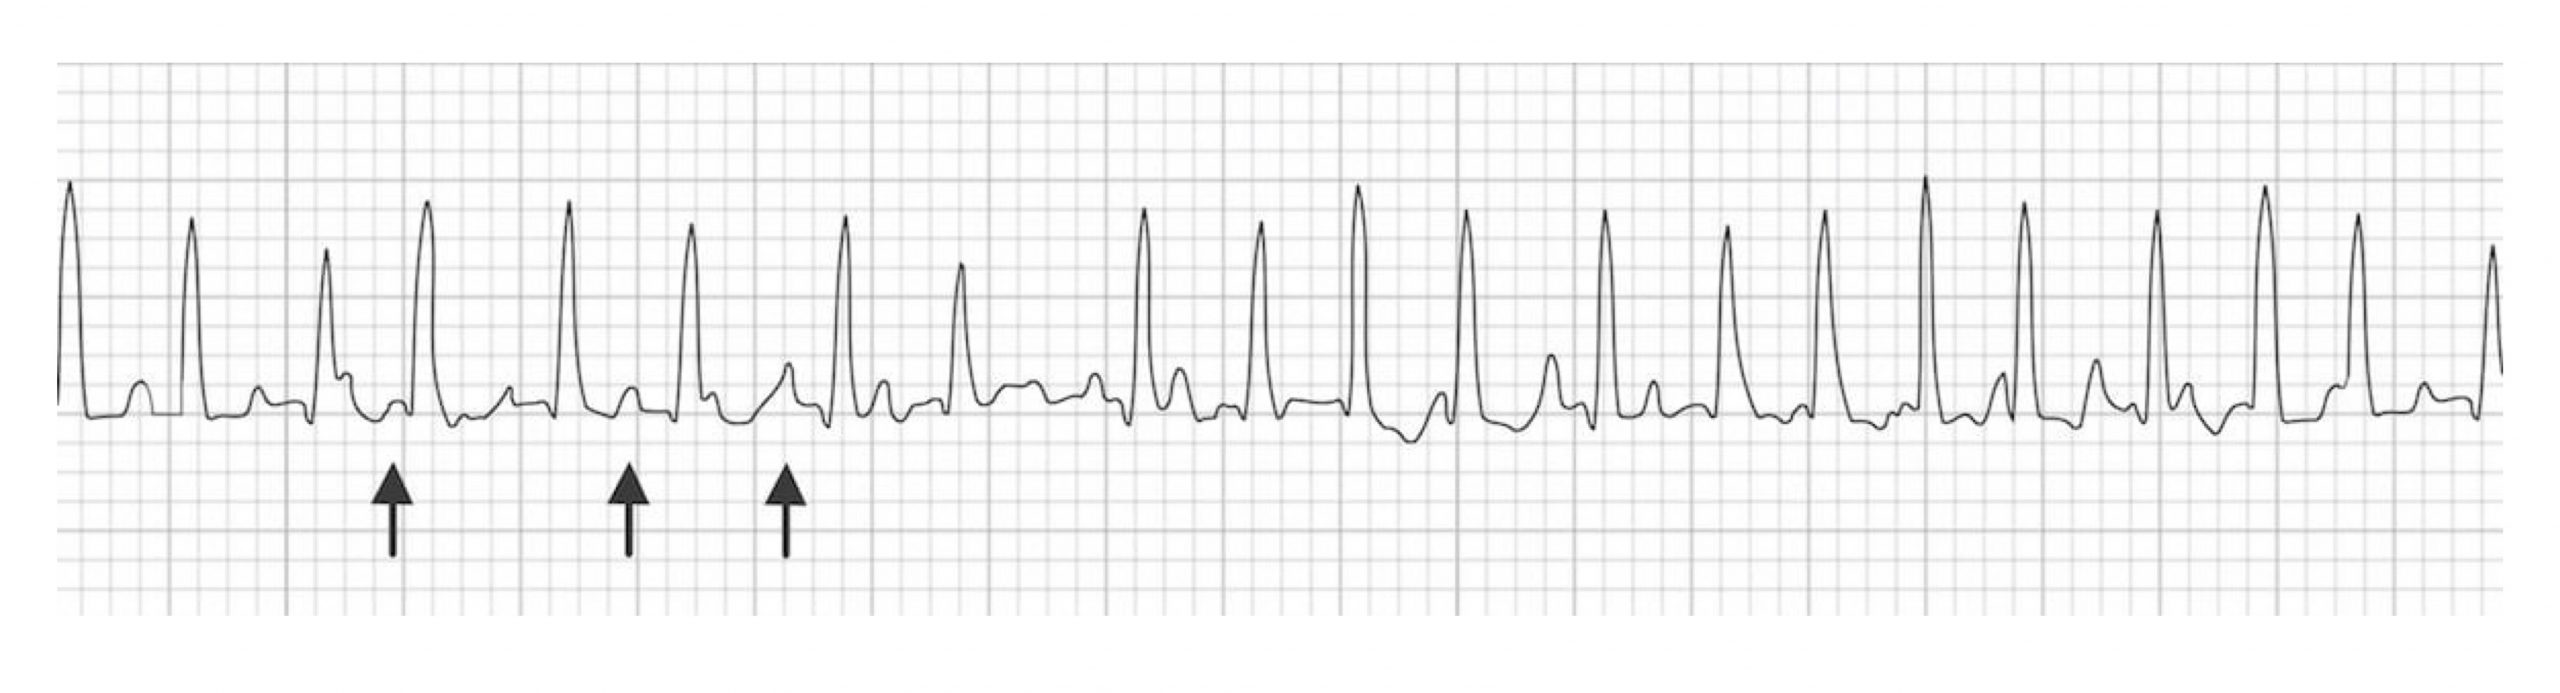 At least three different shapes of P-waves are seen, some small, some broader and some taller. But each one is followed by a QRS complex.